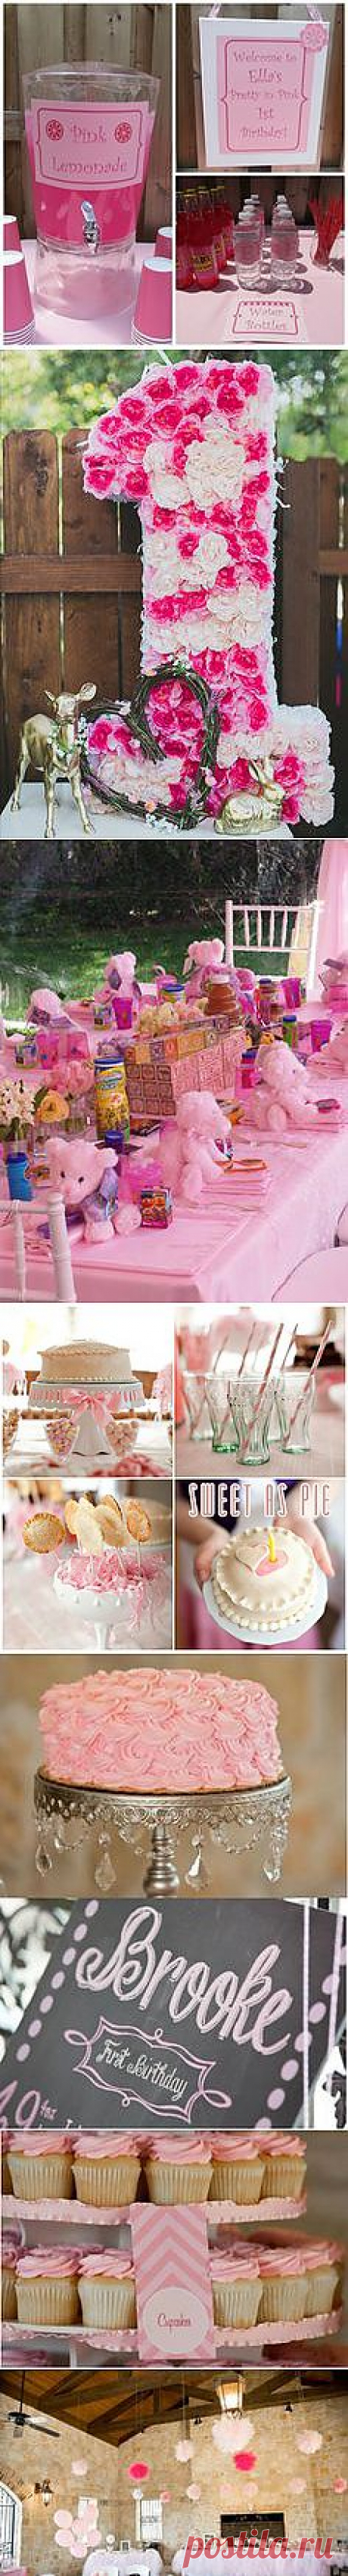 DIY Pretty in pink 1st Birthday party on ... | Kids /baby ideas